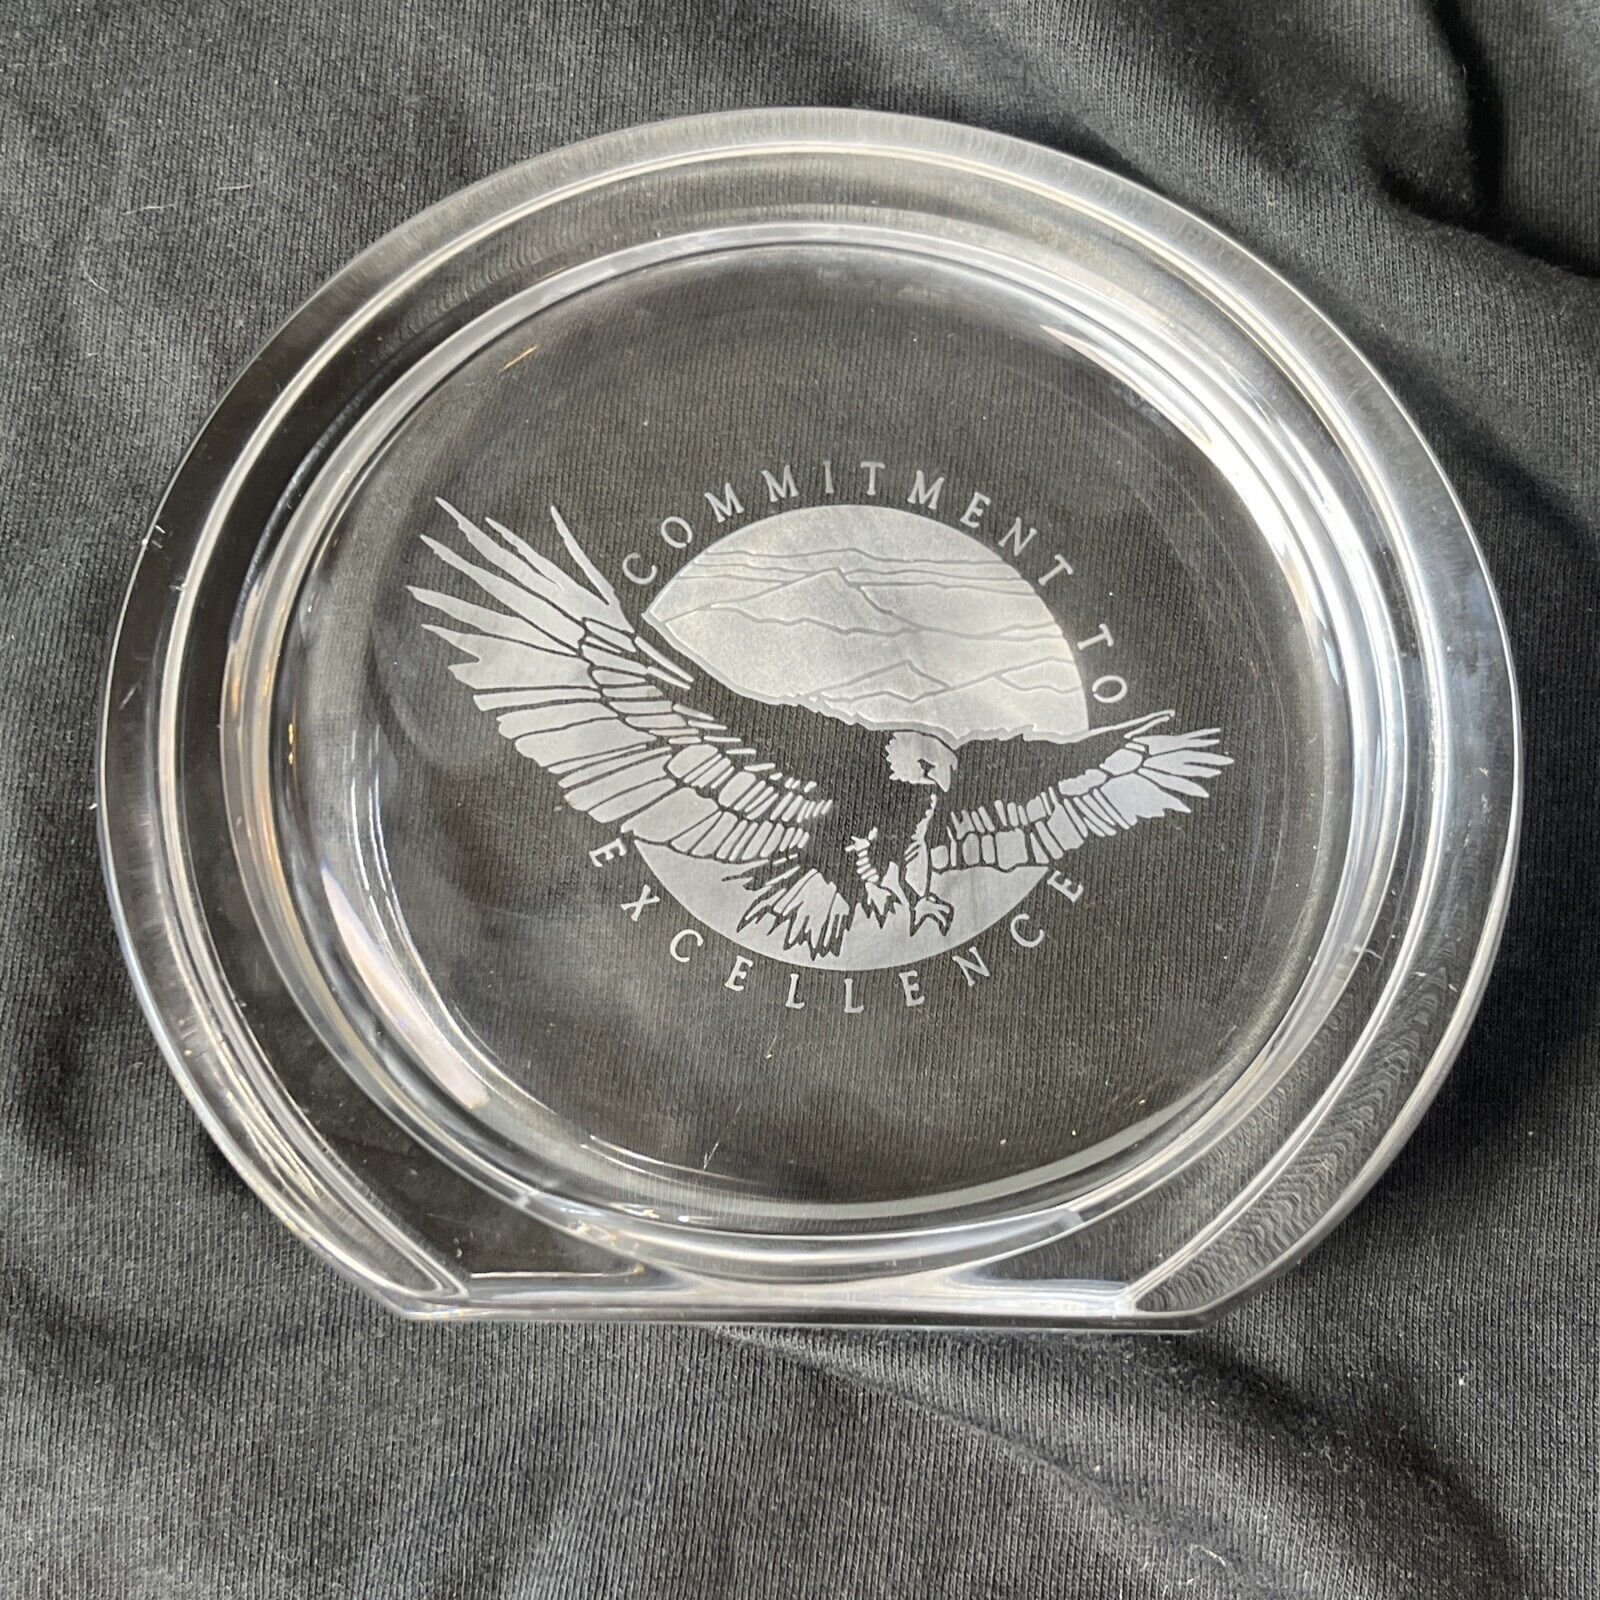 LARGE Glass Paperweight - Commitment to Excellence Etched Eagle Design 7”